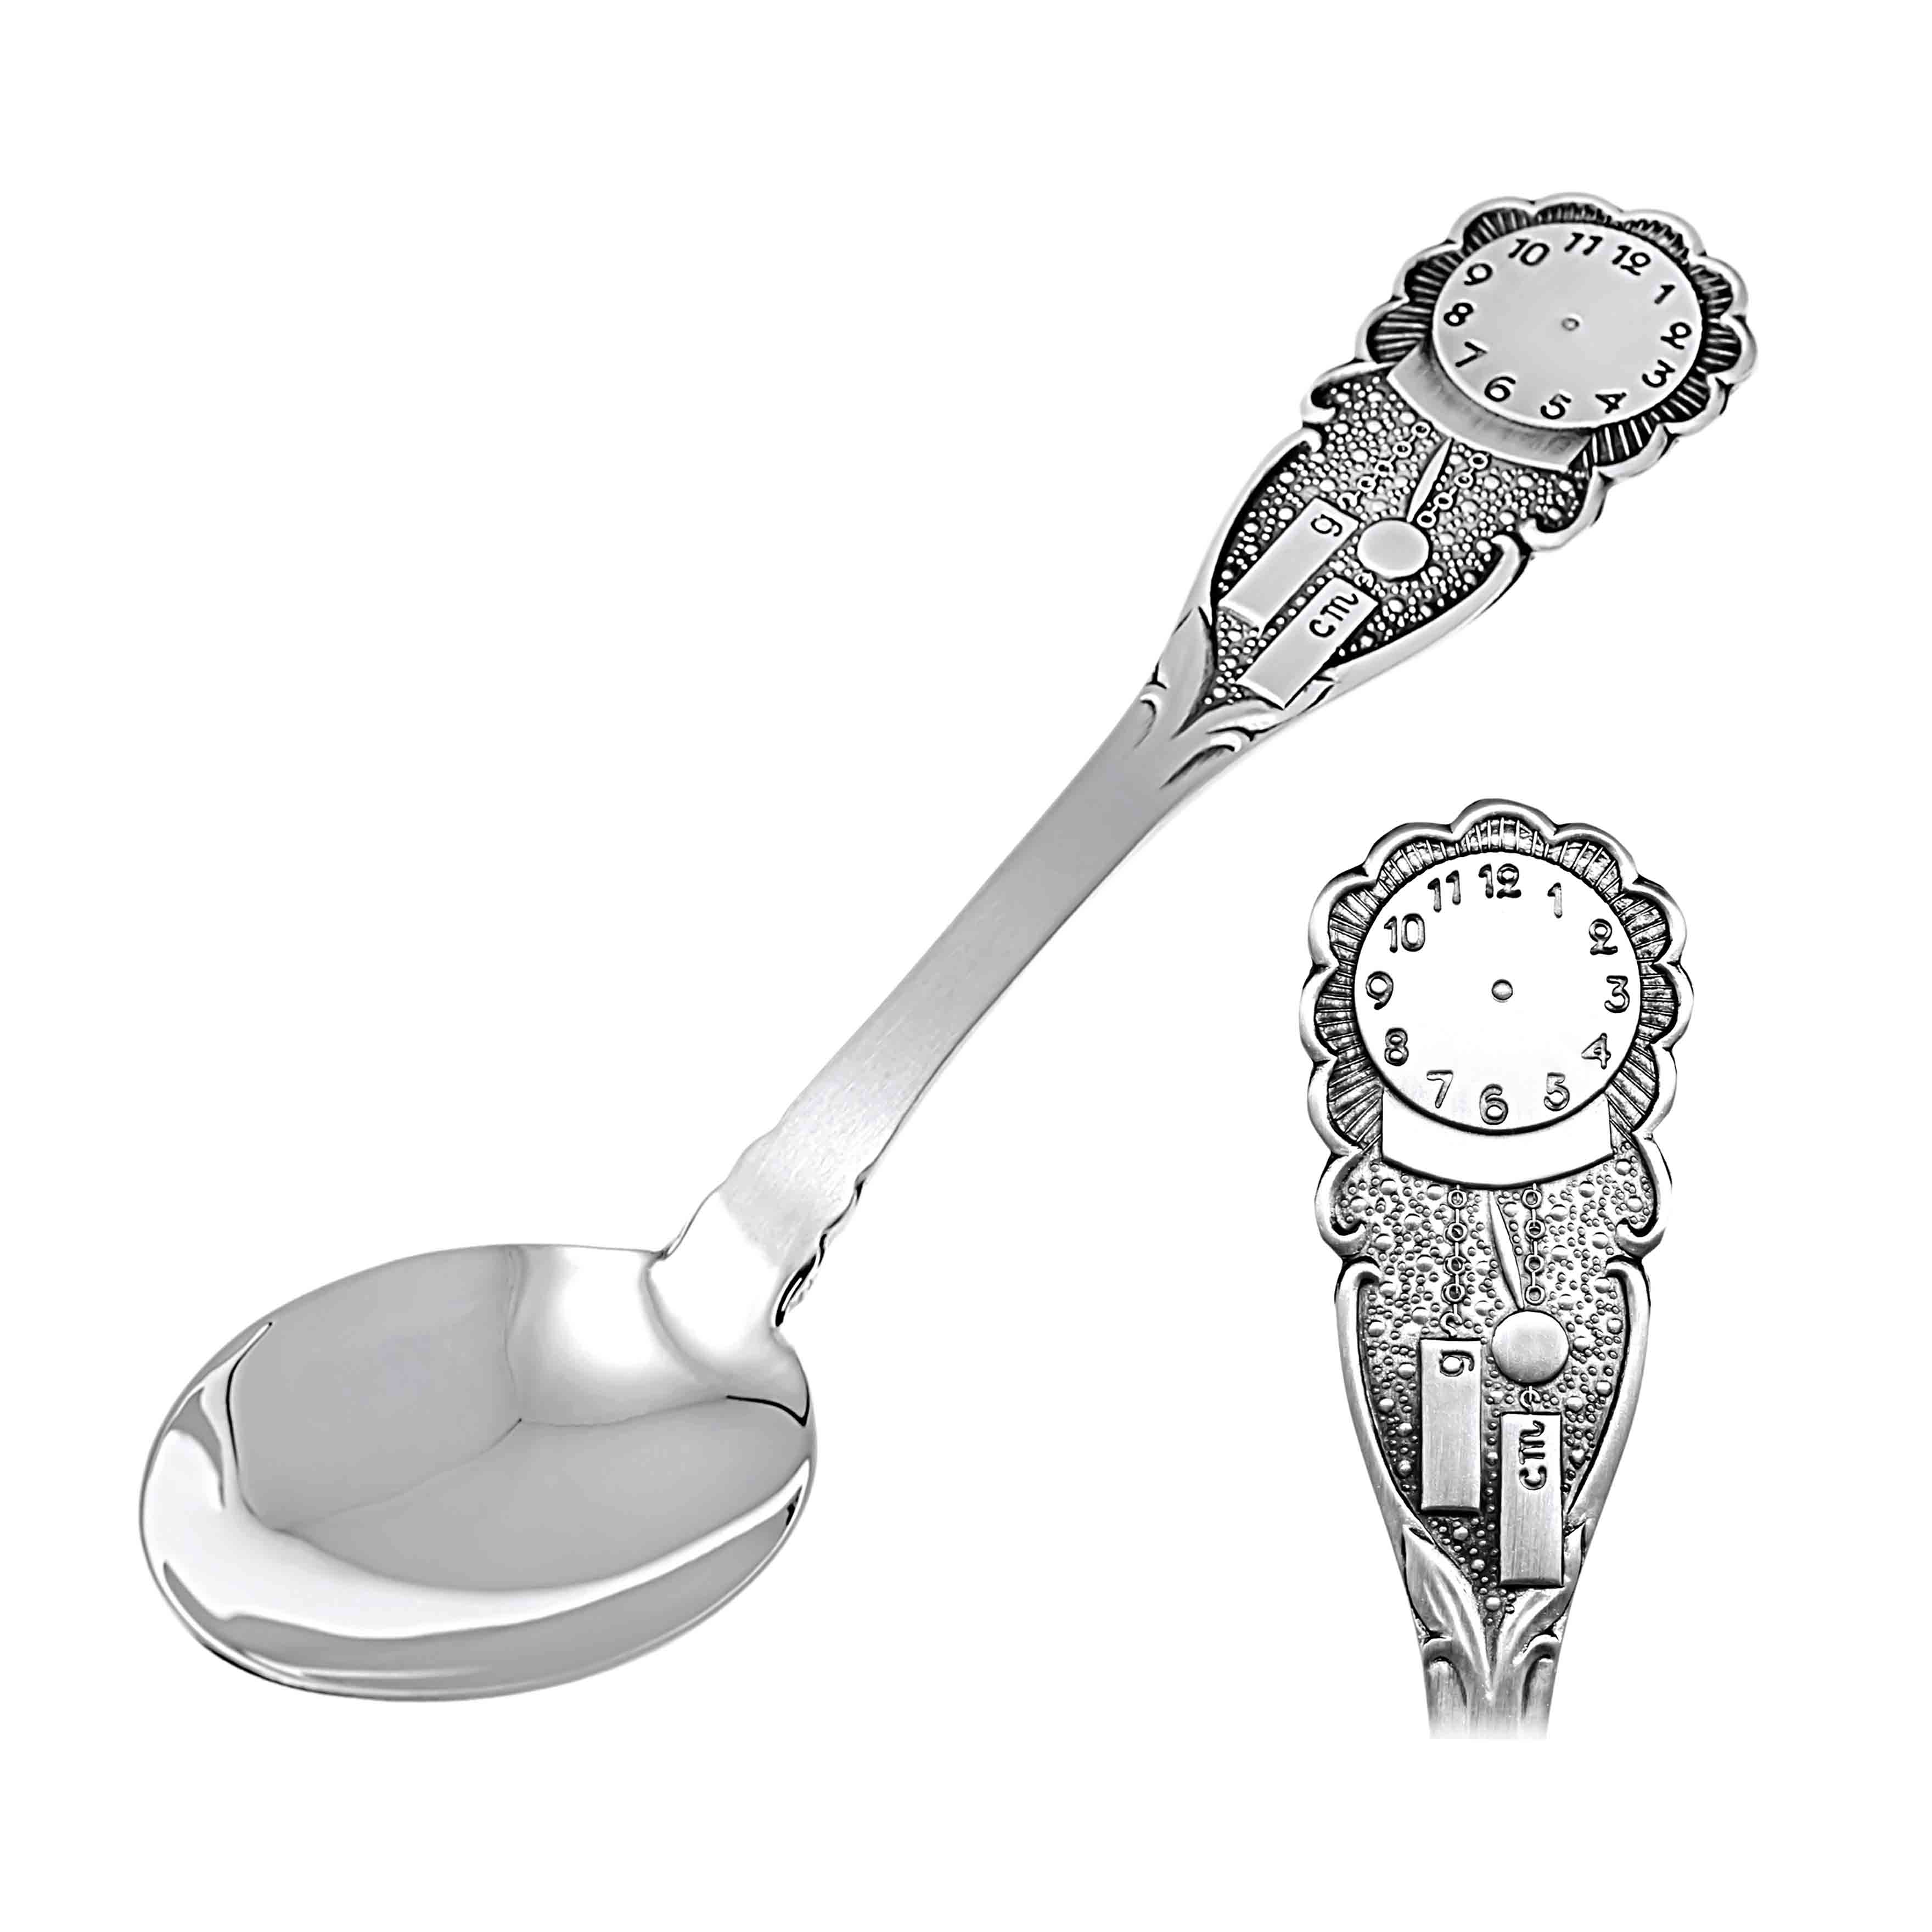 https://www.goldenflamingo.us/media/uploads/product/child-silver-spoon-wall-clock_12854010_a_3520.jpg